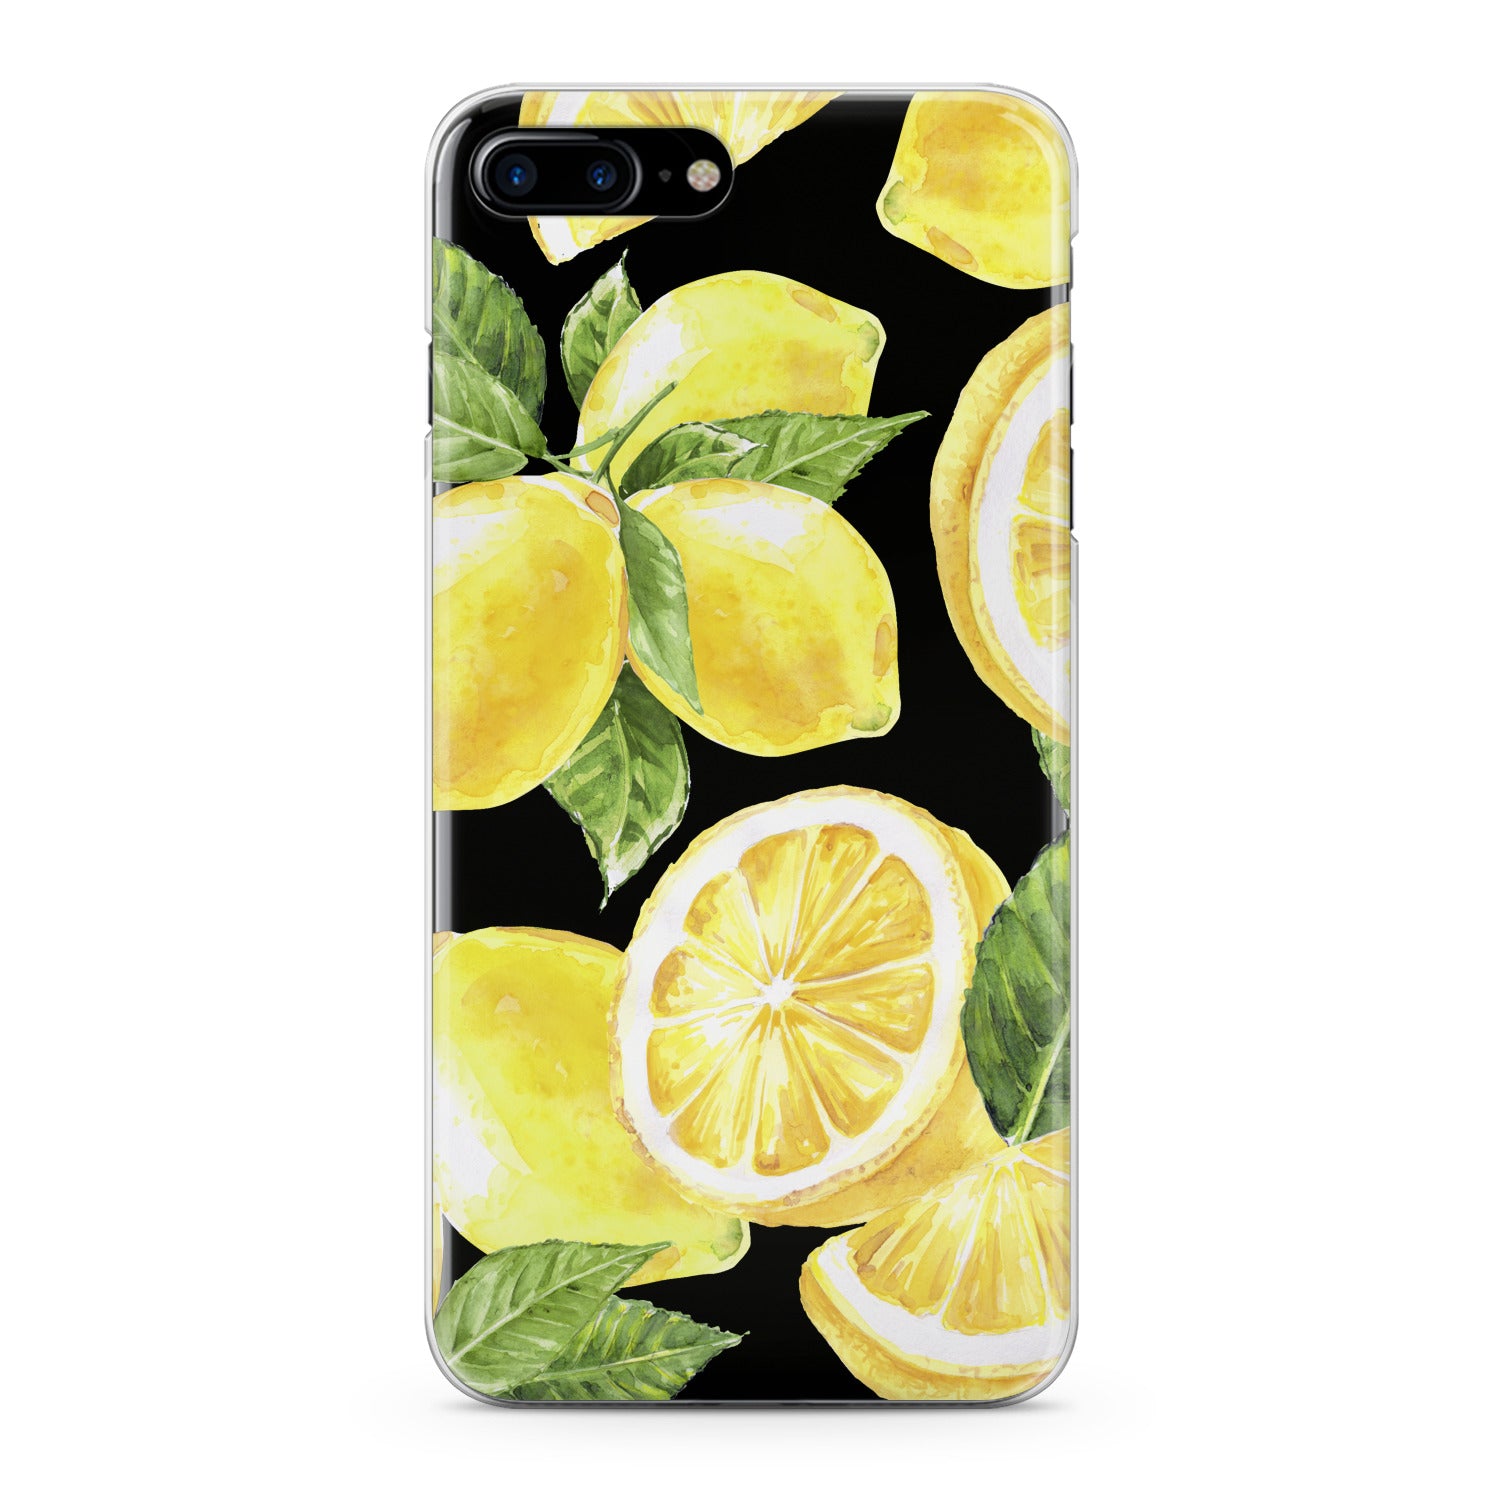 Lex Altern Bright Lemons Phone Case for your iPhone & Android phone.